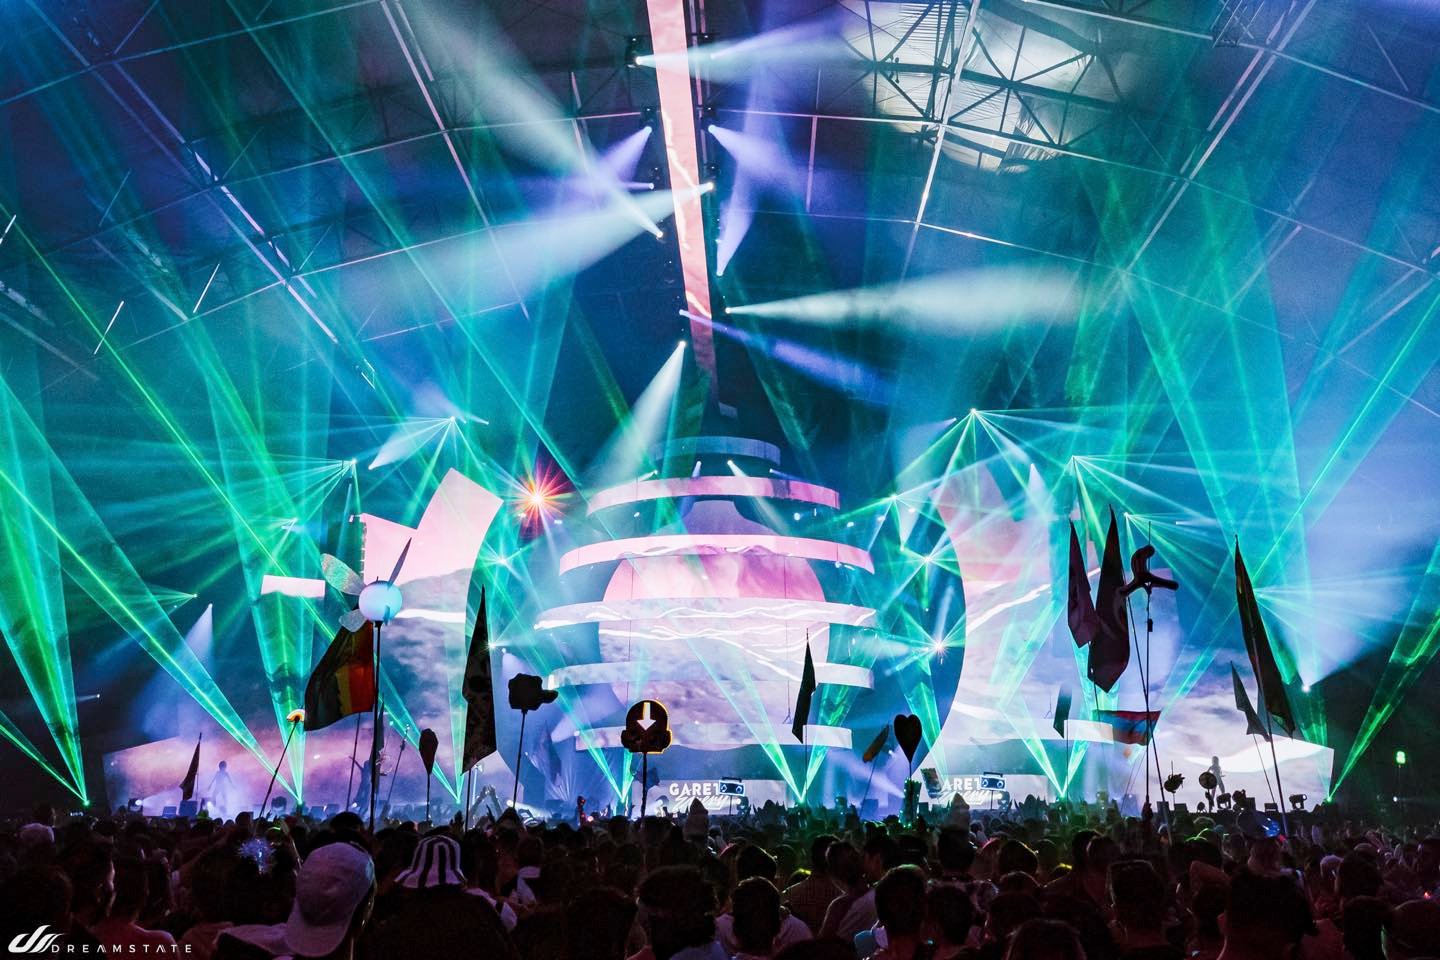 Dreamstate Harbor Announces Exciting Two-Day Lineup - EDMTunes